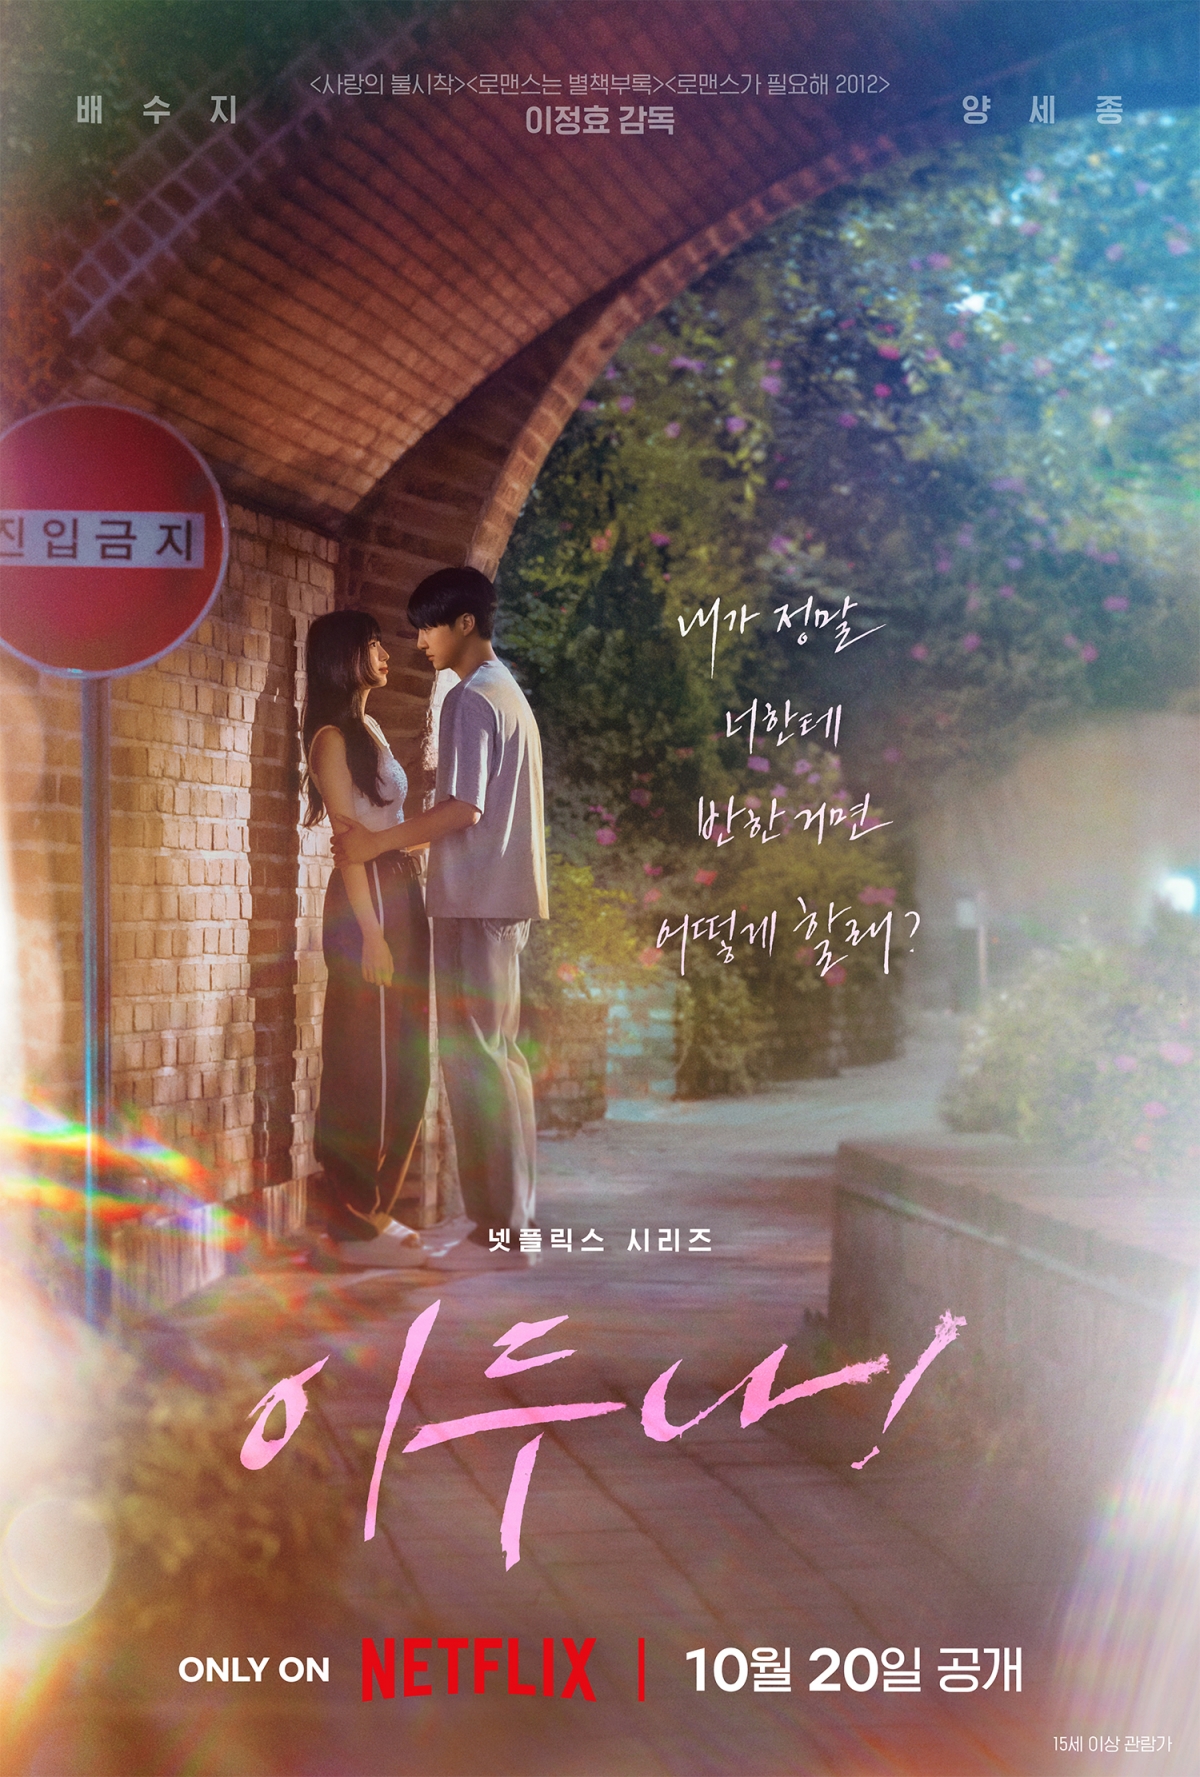 Suzy Yang Se-jong's 'Iduna!' released on October 20th